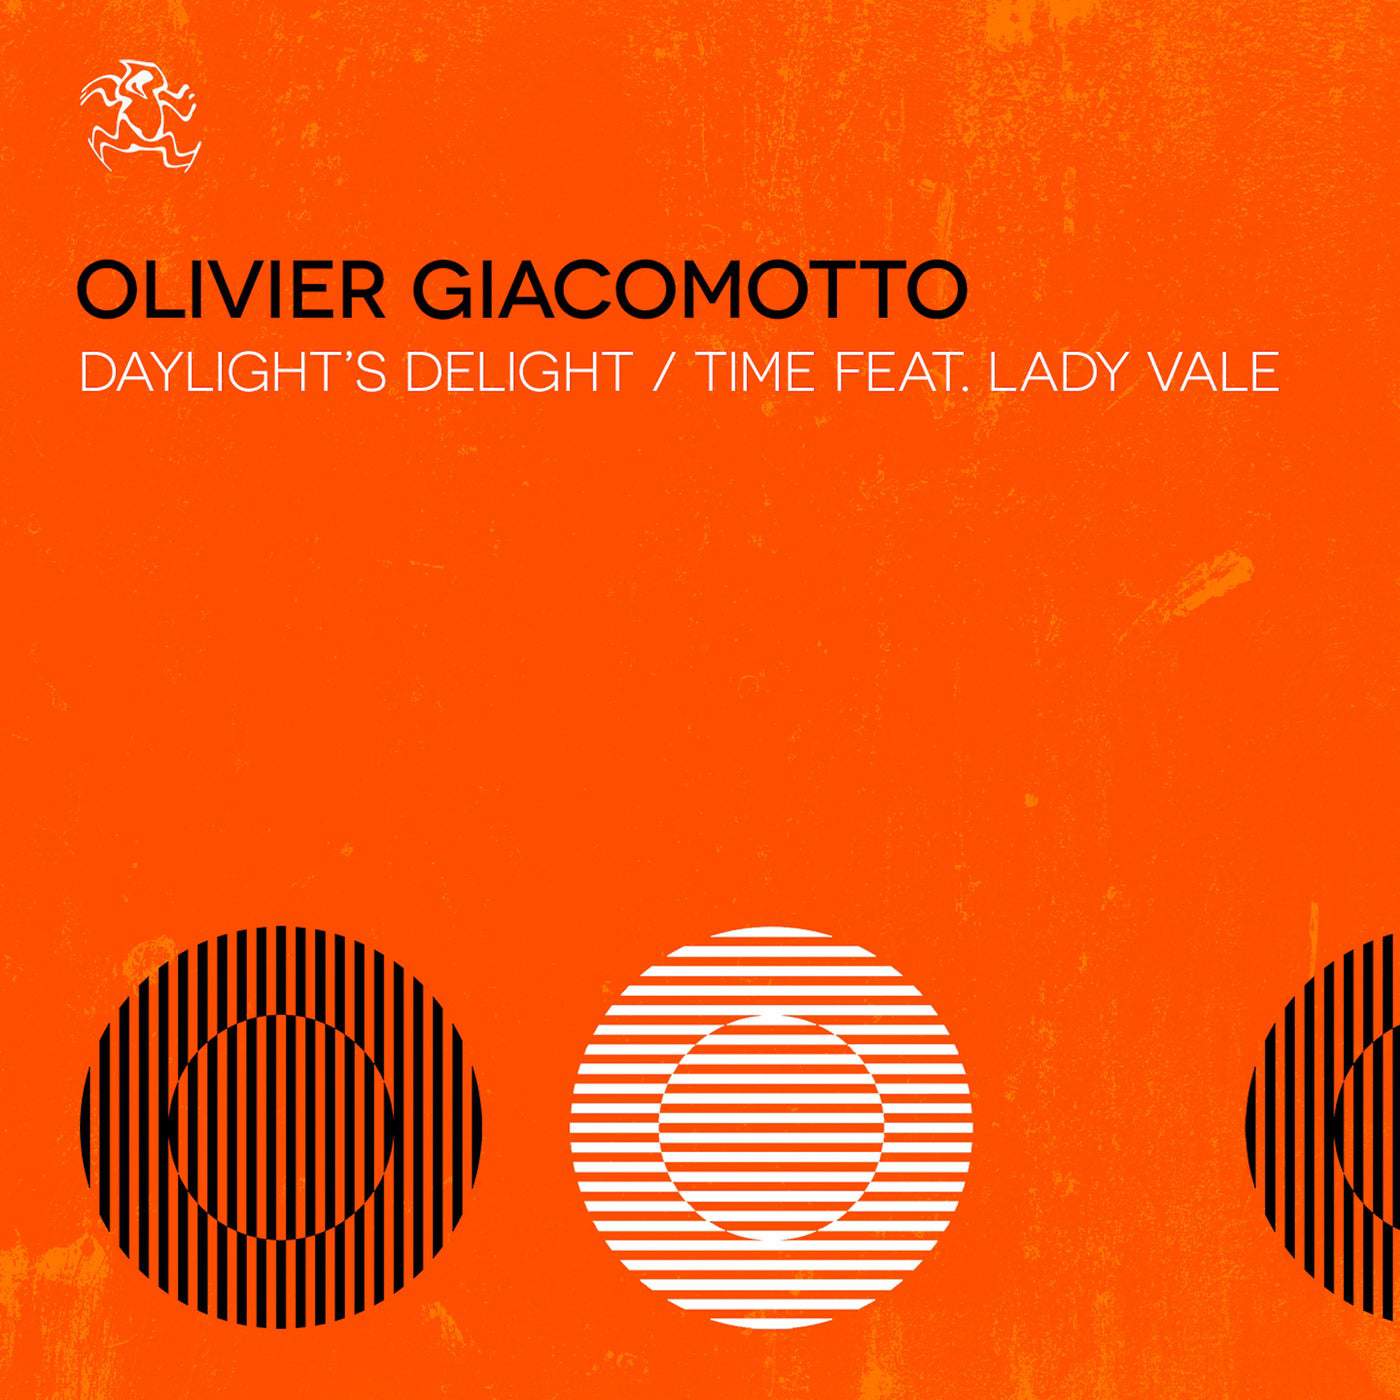 Download Olivier Giacomotto, Lady Vale - Daylight's Delight / Time feat. Lady Vale on Electrobuzz